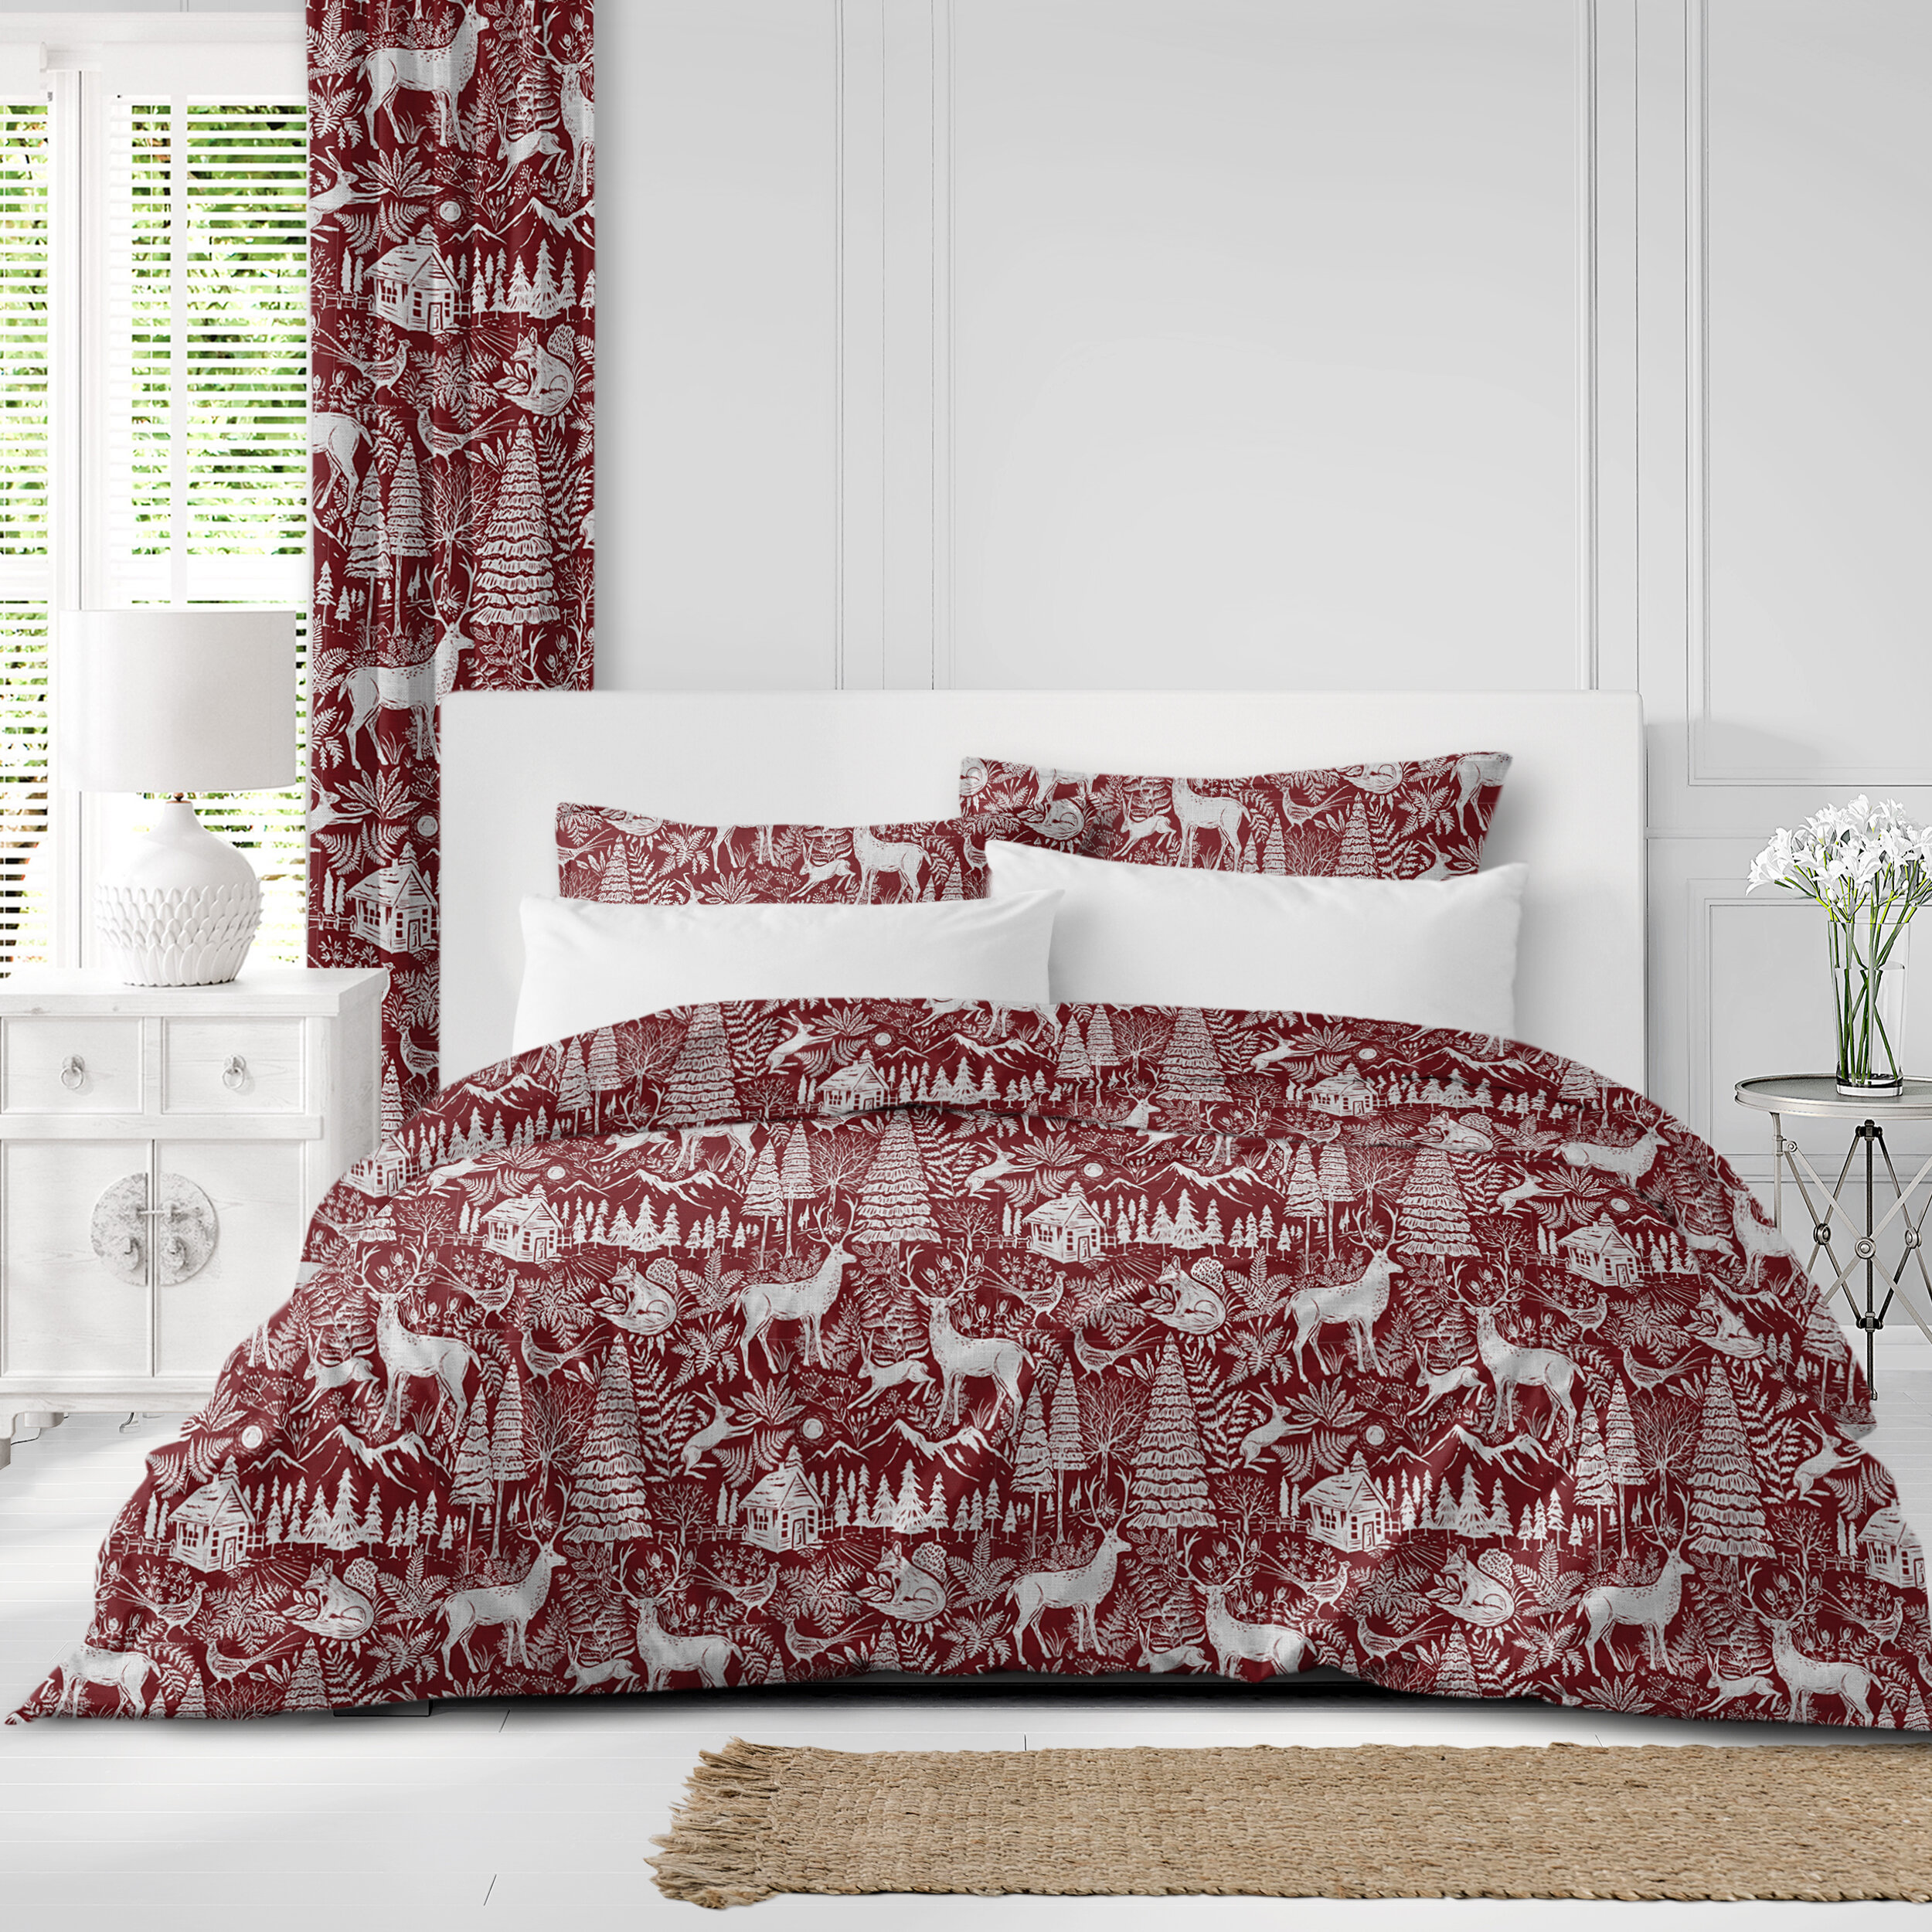 HEY BIRDIE DOUBLE DUVET COVER AND PILLOWCASE SET POLYCOTTON RAPPORT NEW